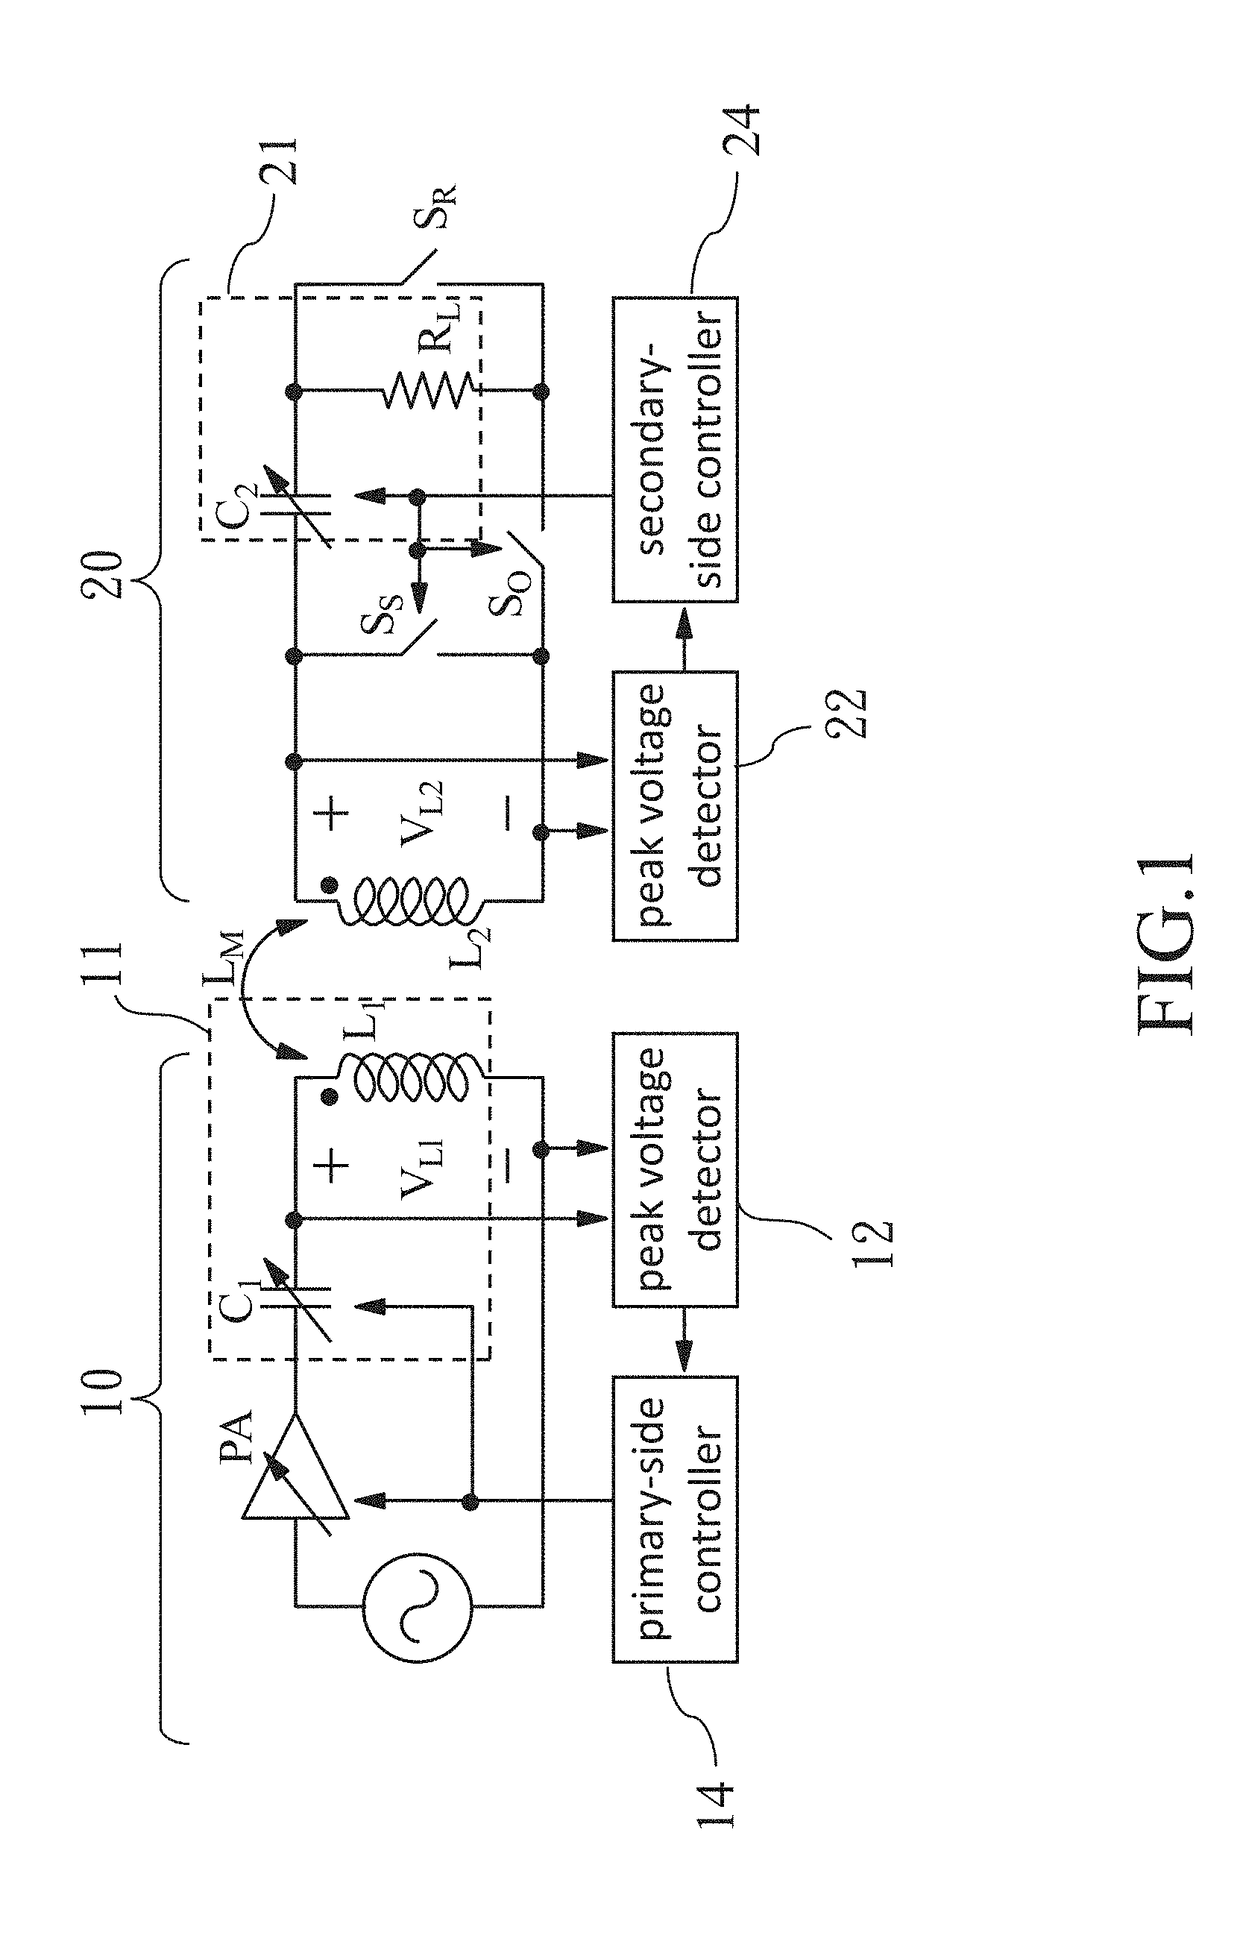 Resonant magnetic coupling wireless power transfer system with calibration capabilities of its inductor-capacitor resonant frequencies